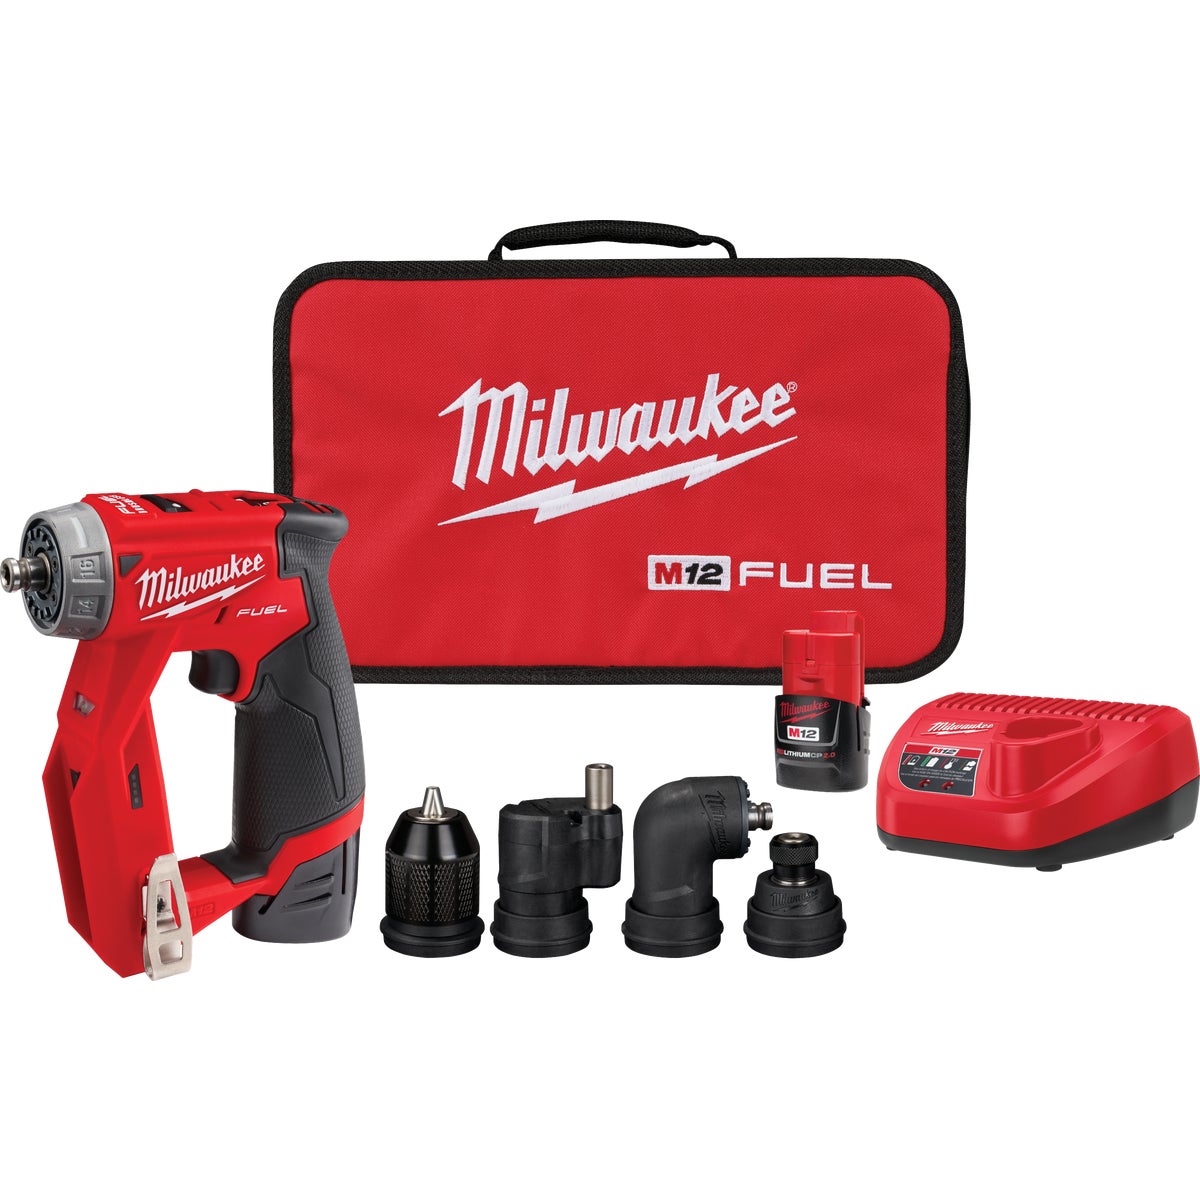 Milwaukee M12 FUEL Brushless 3/8 In. Installation Cordless Drill/Driver Kit with 4-Tool Heads